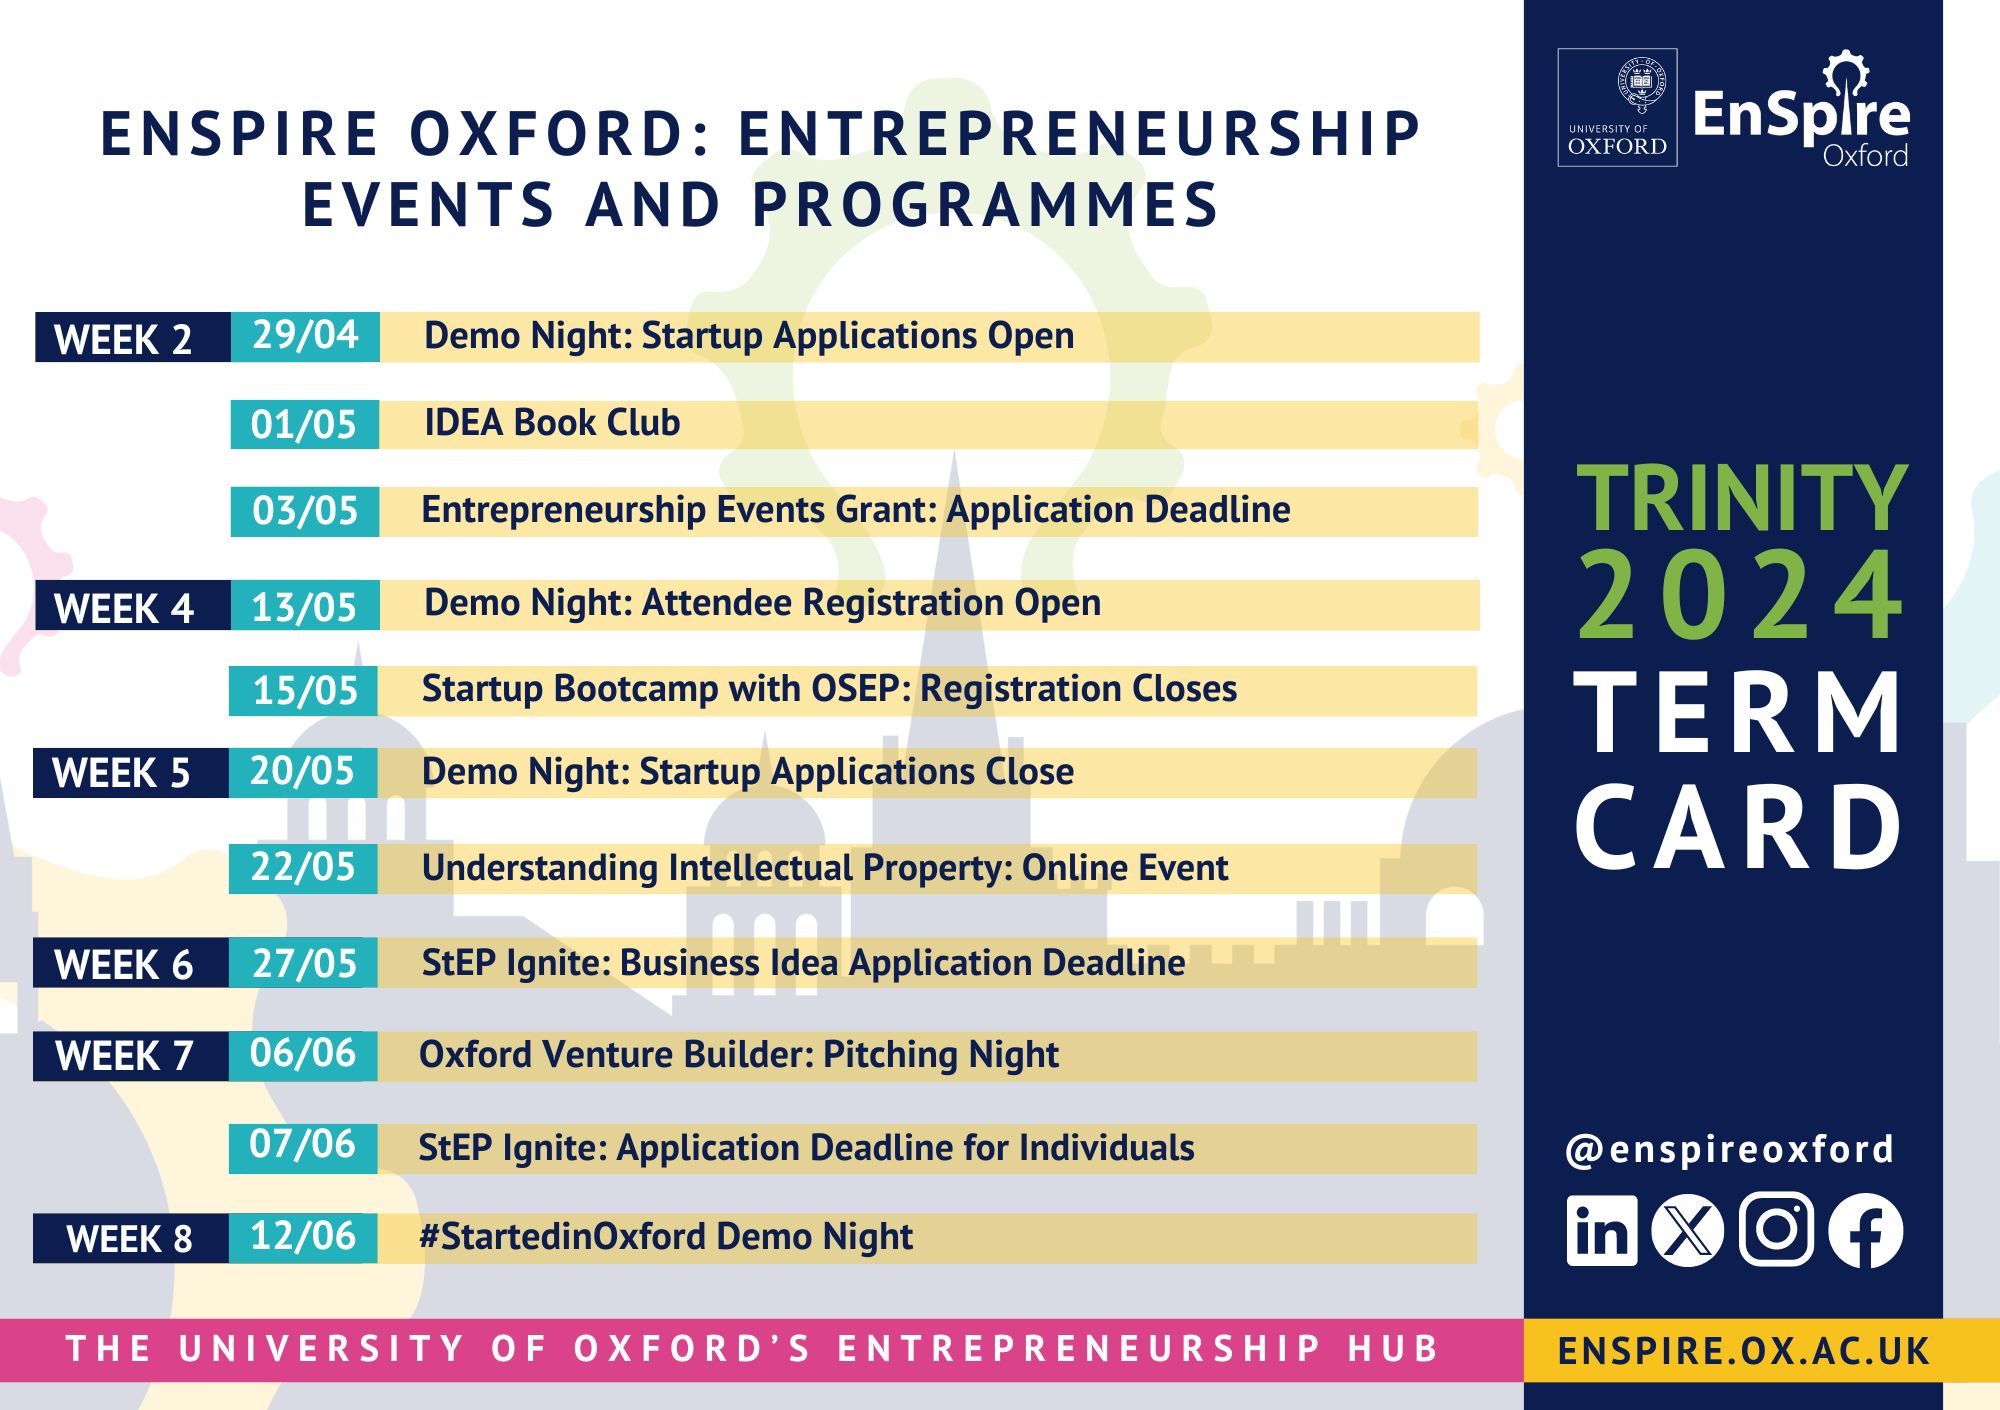 A list of entrepreneurship events and programmes happening in Trinity Term 2024